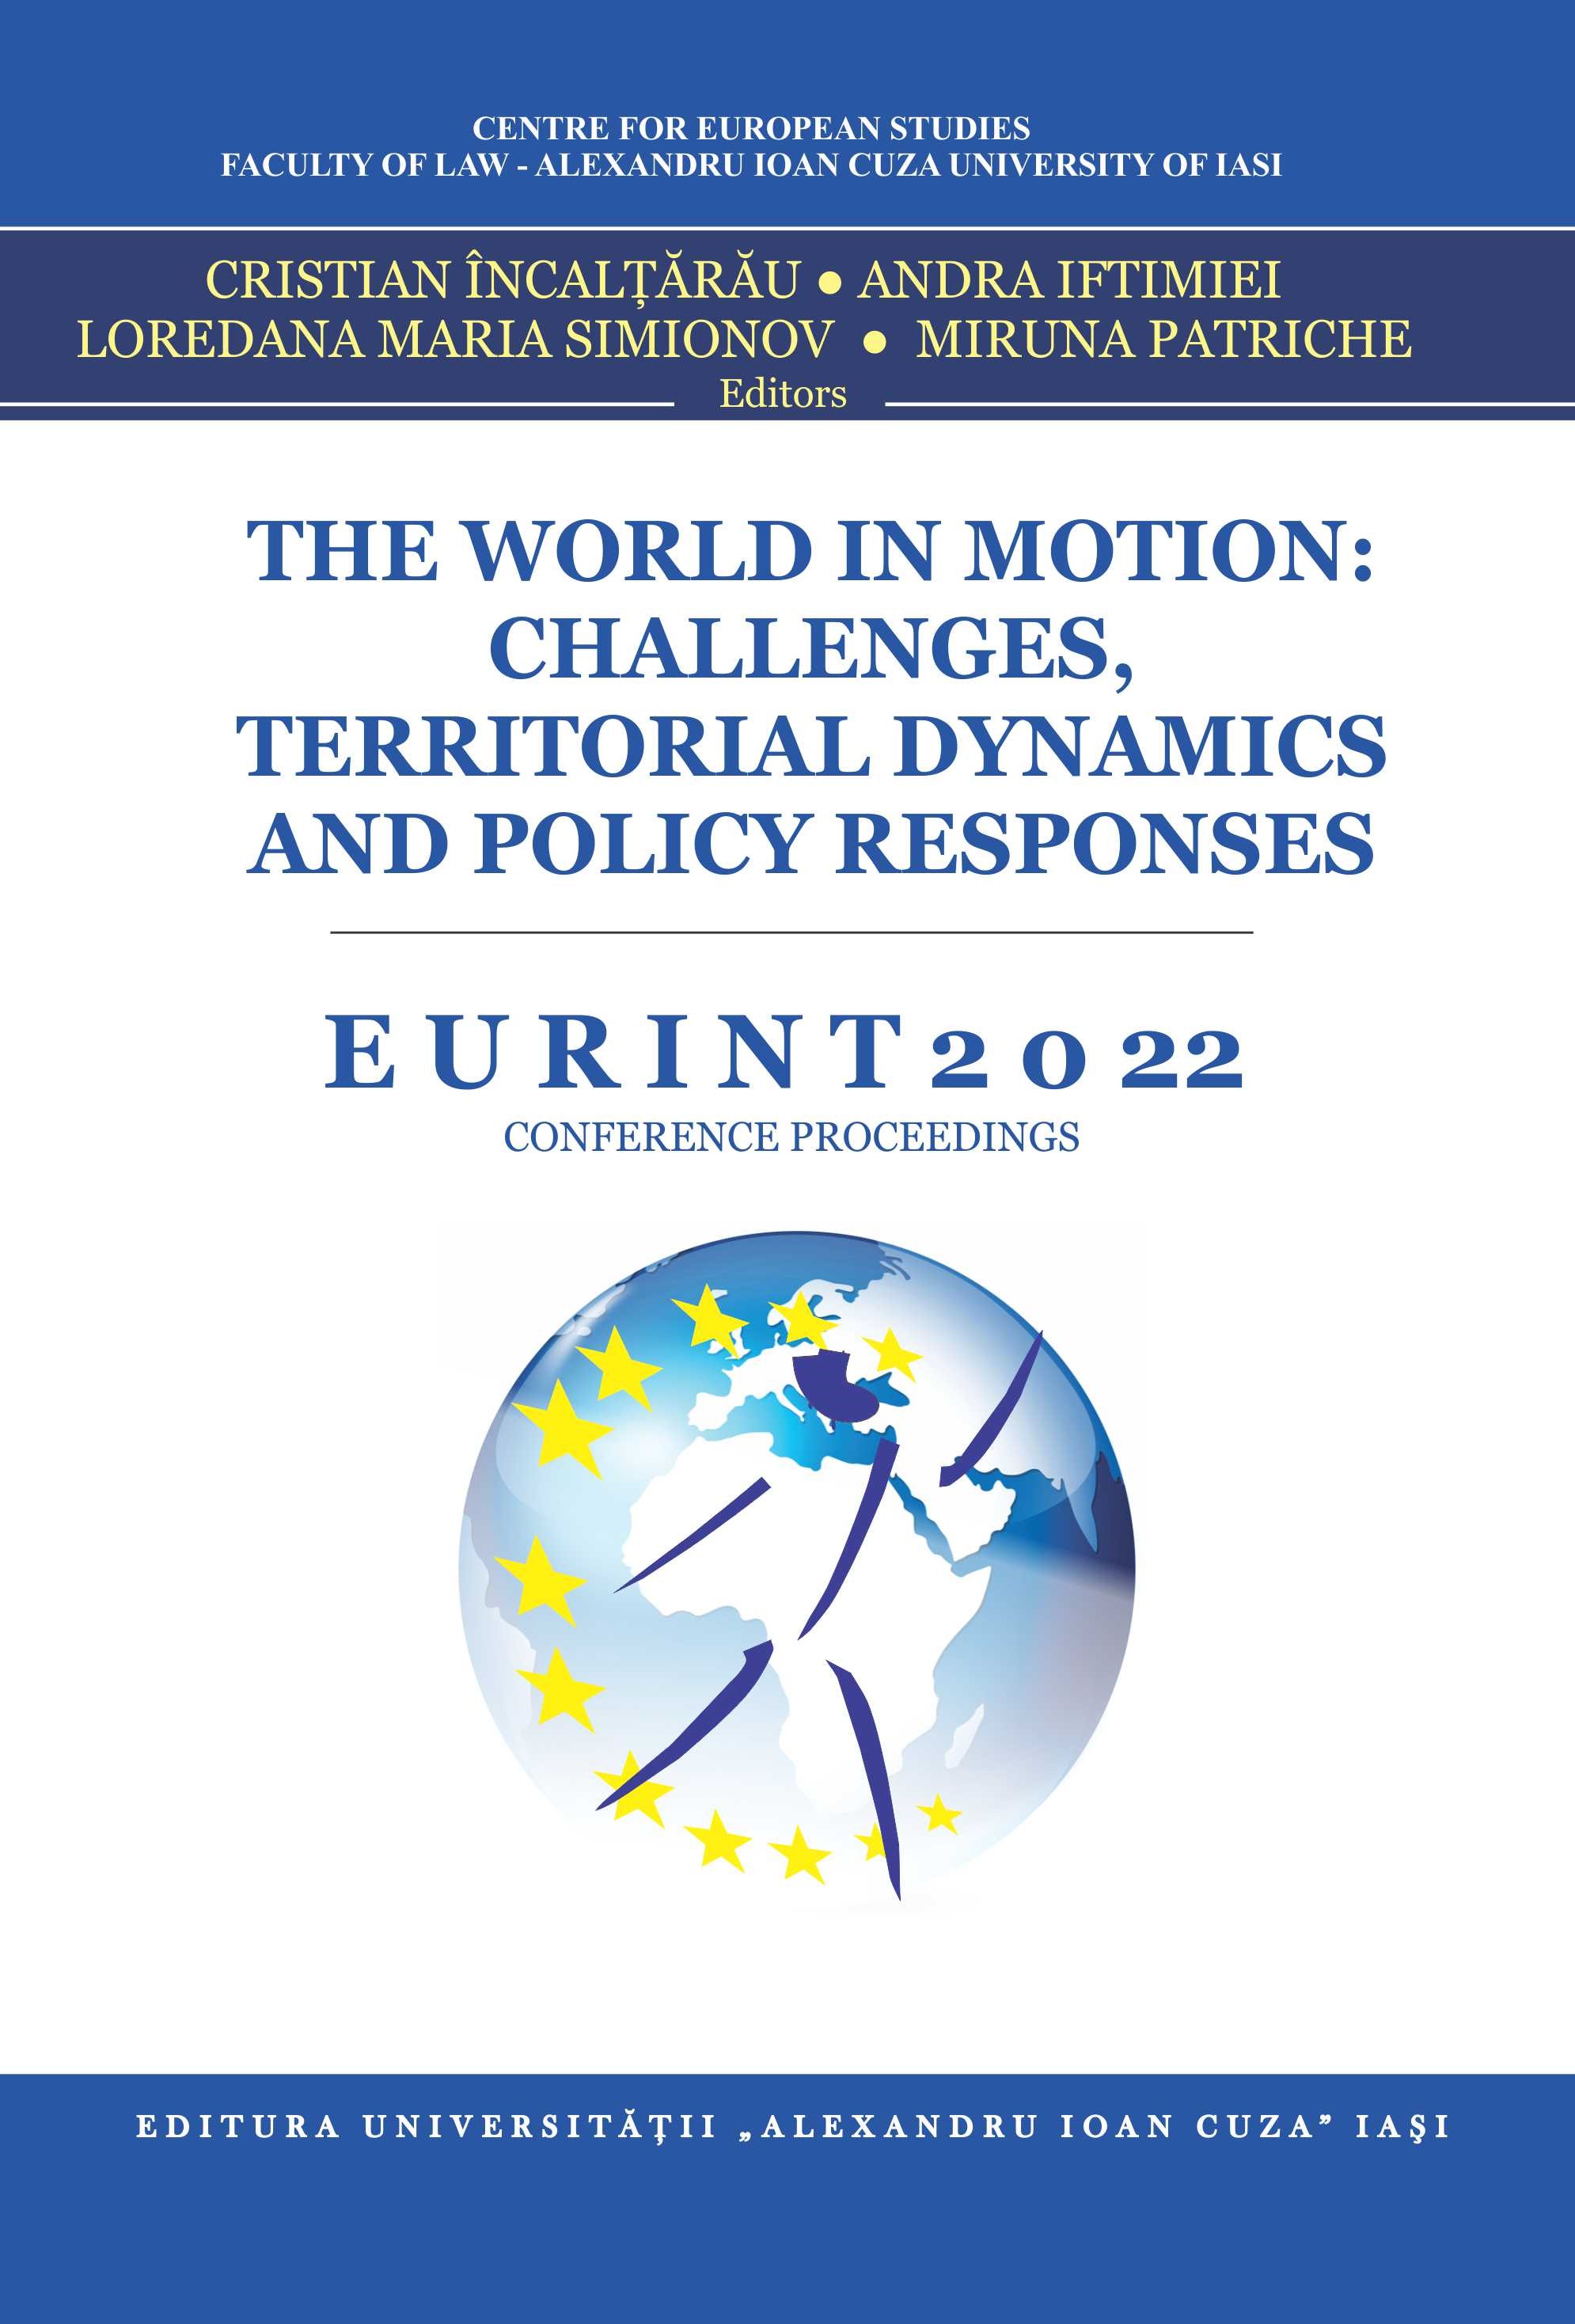 THE ROLE OF INTERNATIONAL ORGANIZATIONS IN THE EUROPEAN TERRITORIAL CHANGES OF THE PAST 30 YEARS Cover Image